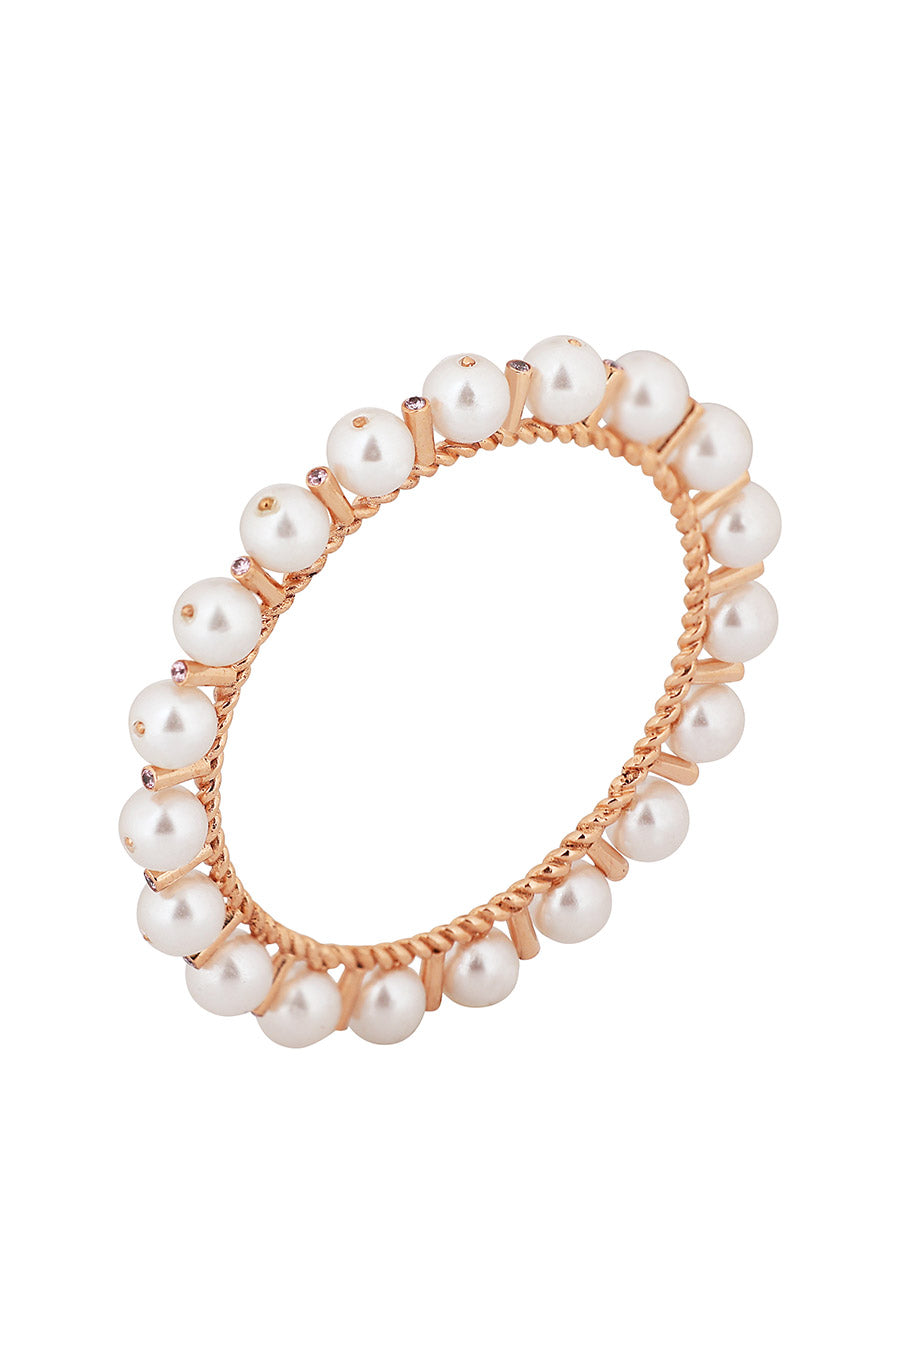 Pearl Gold Plated Bangle